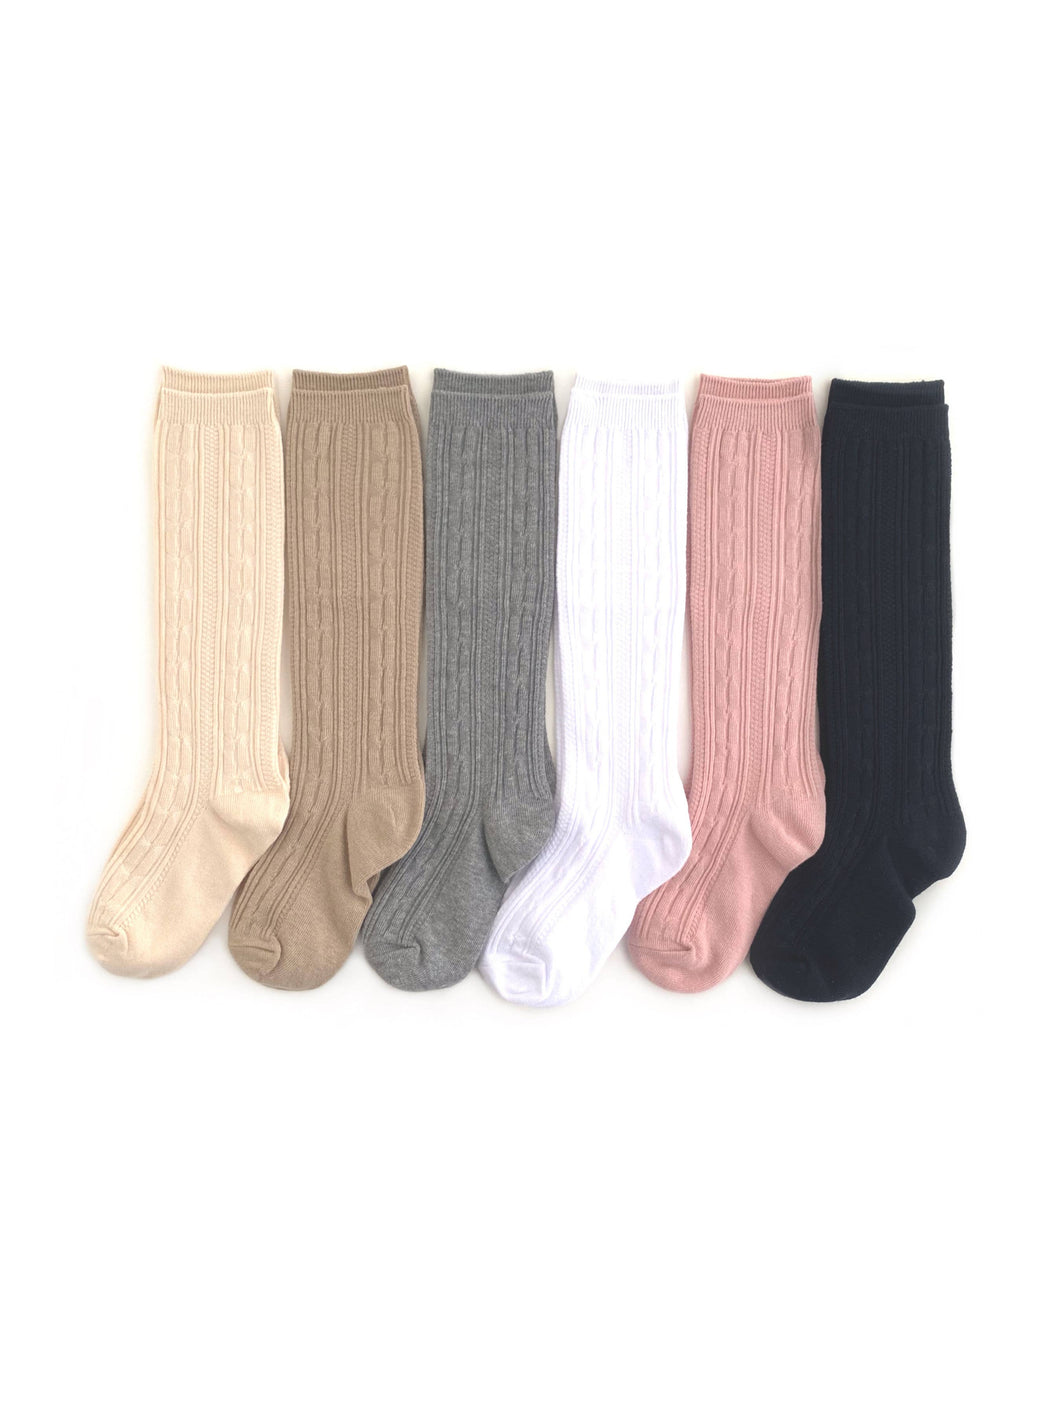 Cable Knit Knee High Socks by Little Stocking Co.